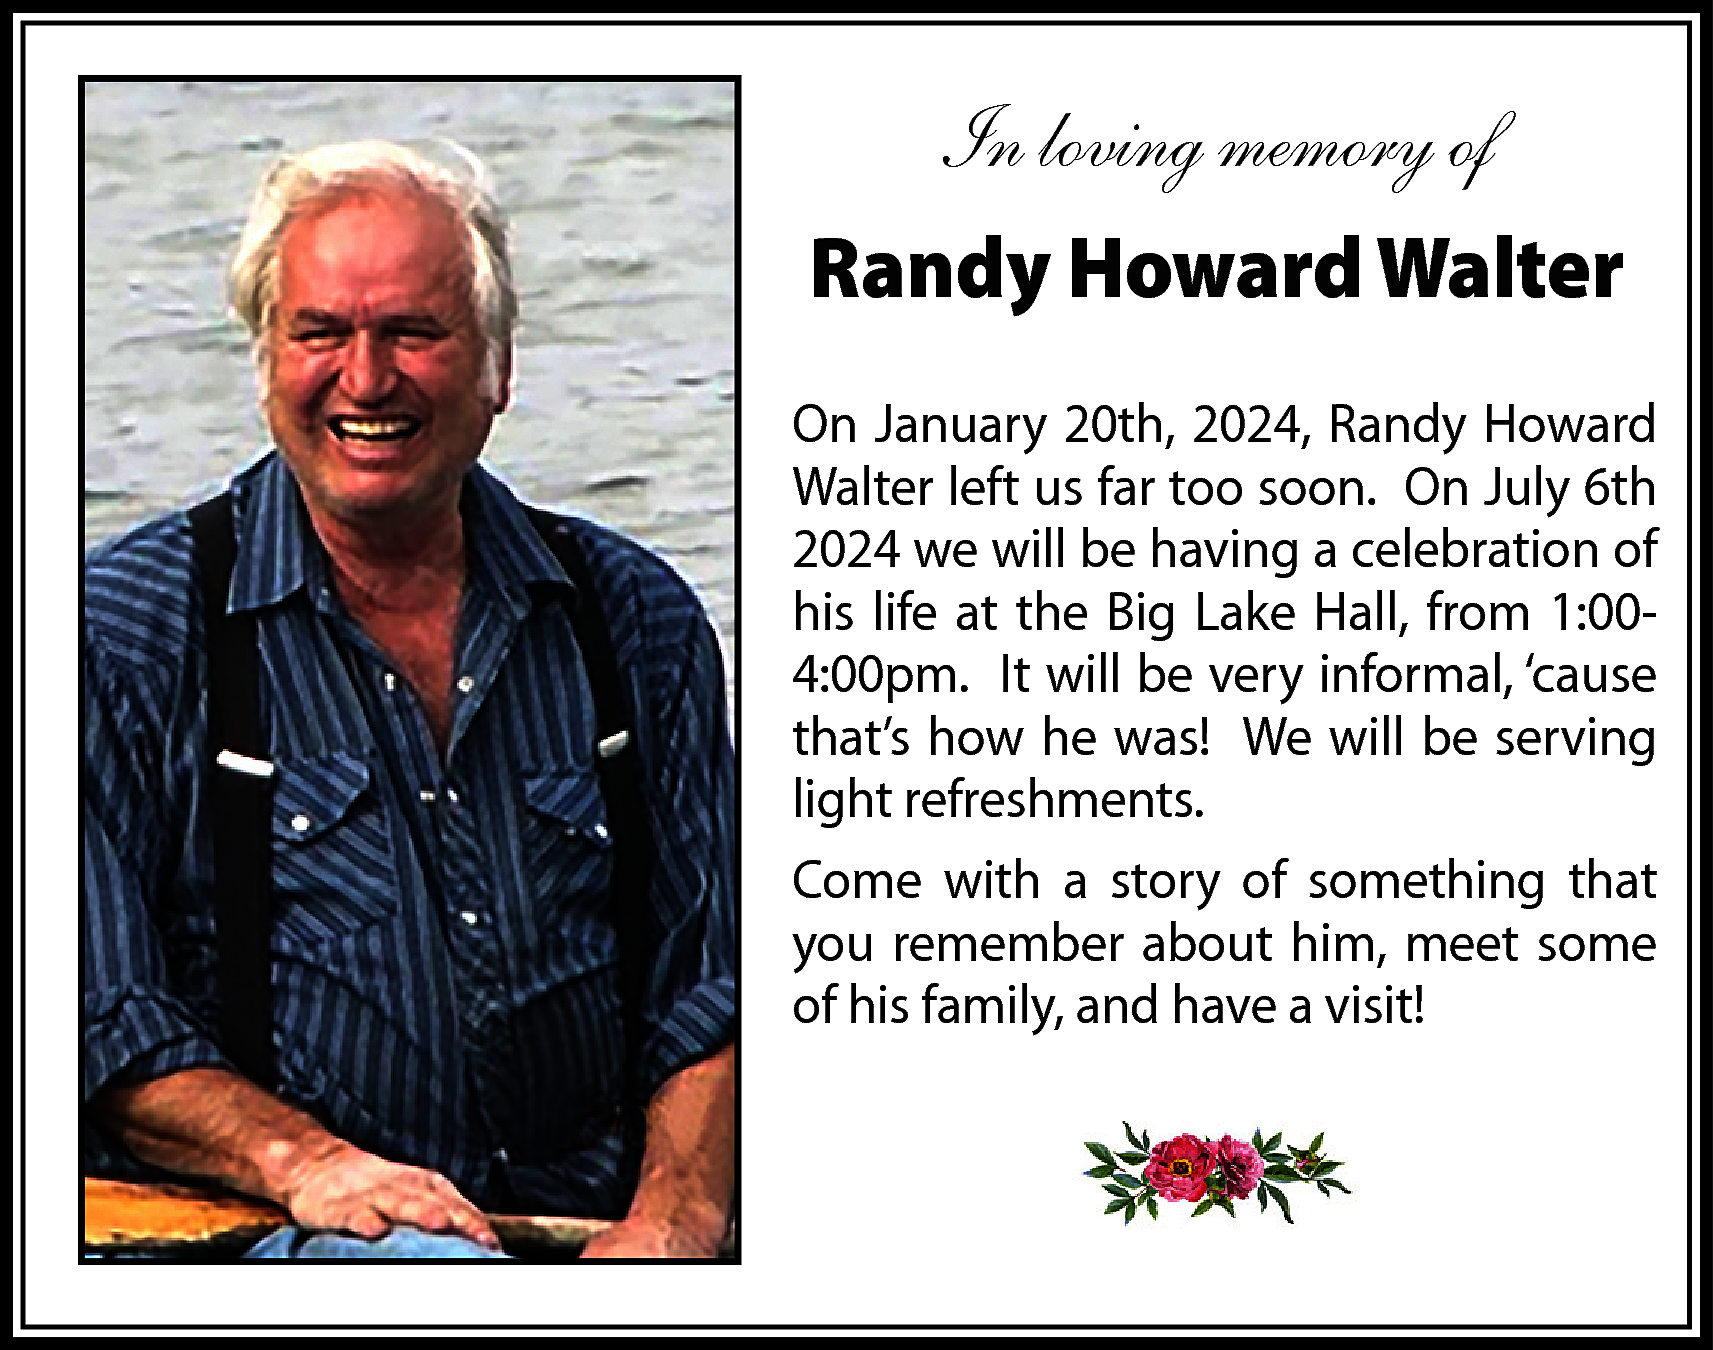 In loving memory of <br>Randy  In loving memory of  Randy Howard Walter  On January 20th, 2024, Randy Howard  Walter left us far too soon. On July 6th  2024 we will be having a celebration of  his life at the Big Lake Hall, from 1:004:00pm. It will be very informal, ‘cause  that’s how he was! We will be serving  light refreshments.  Come with a story of something that  you remember about him, meet some  of his family, and have a visit!    